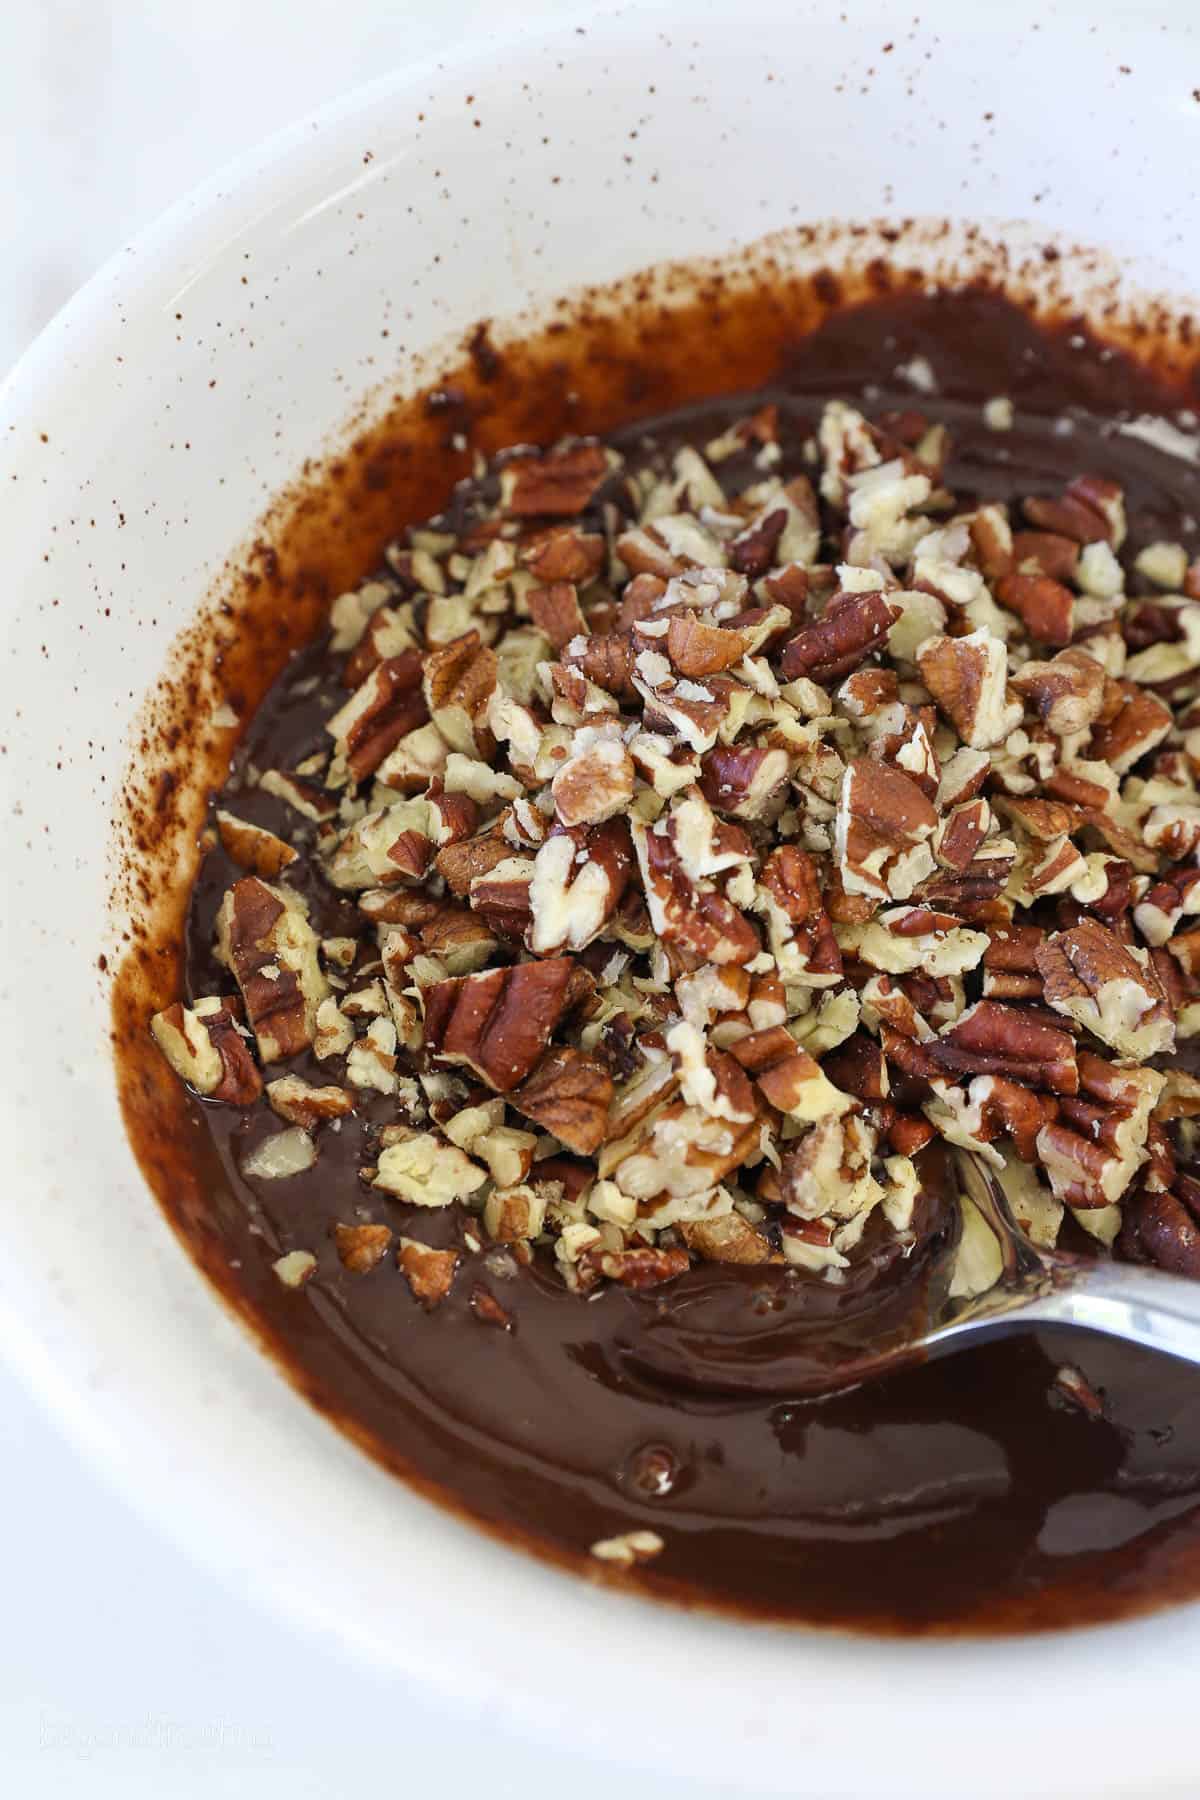 Pecans added with melted chocolate